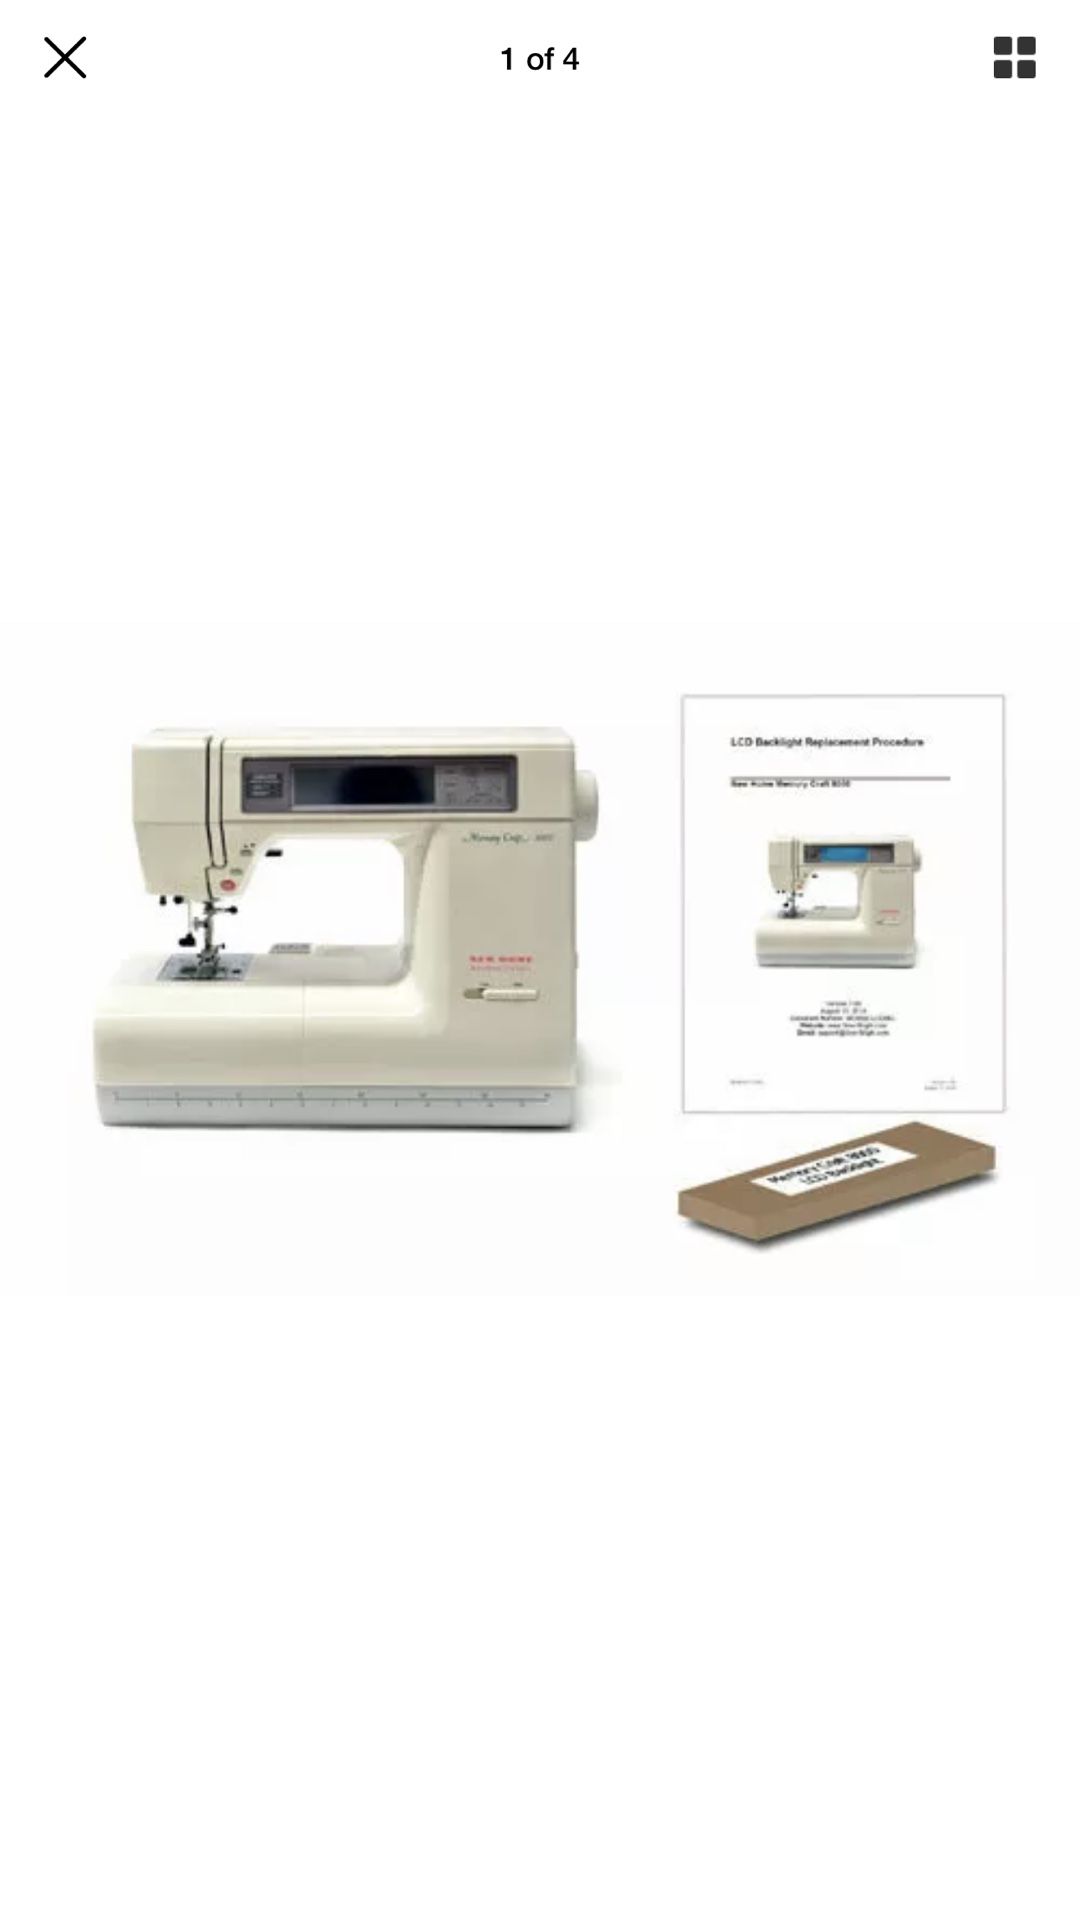 Memory Craft 8000 Perfect condition Does embroidery Price negotiable